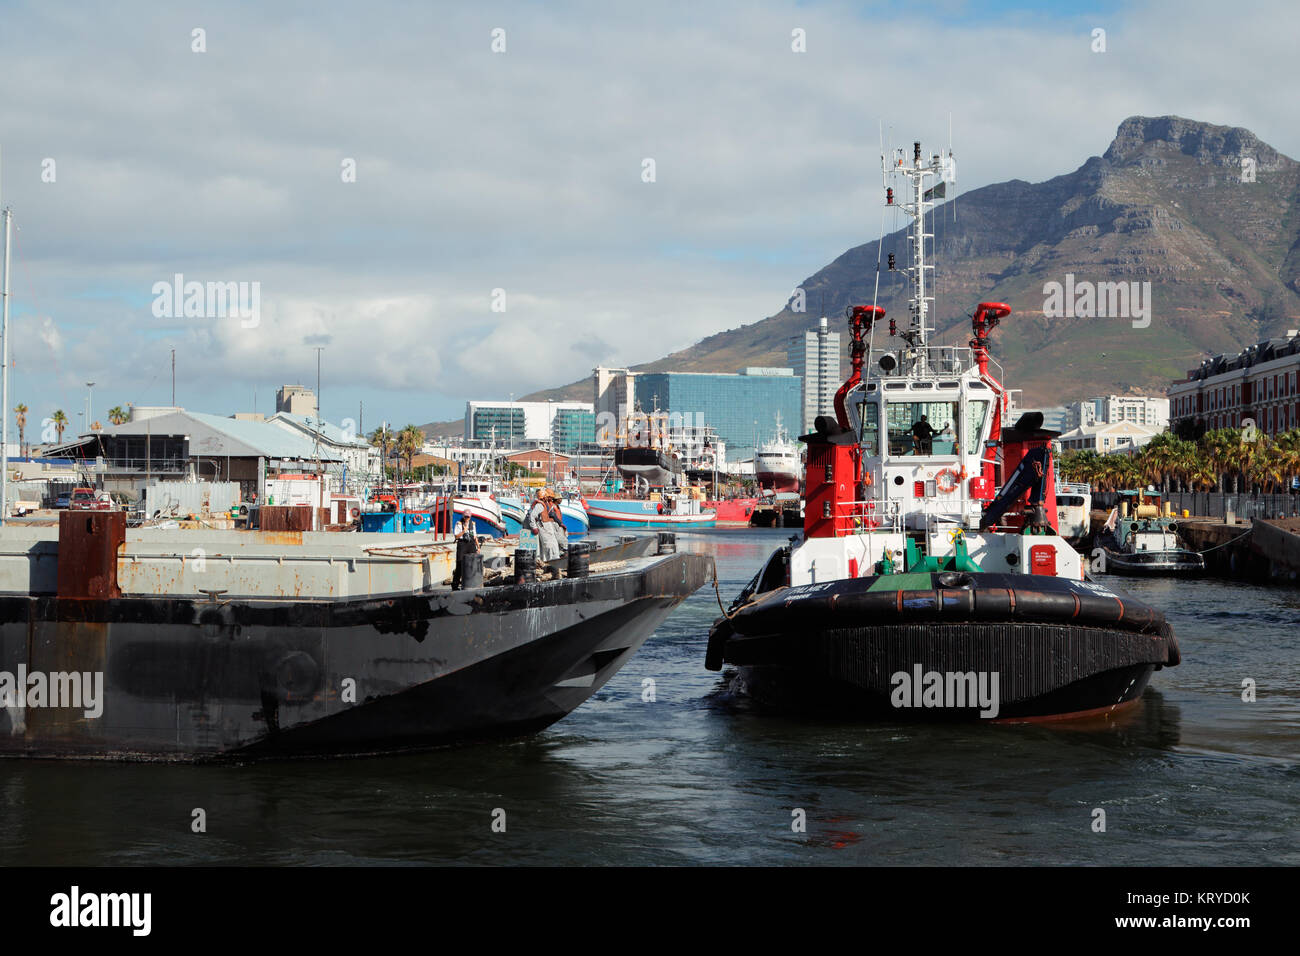 CAPE TOWN, SOUTH AFRICA - FEBRUARY 20, 2012: Victoria and Alfred Waterfront, harbor with boats and part of the famous Table Mountain Stock Photo